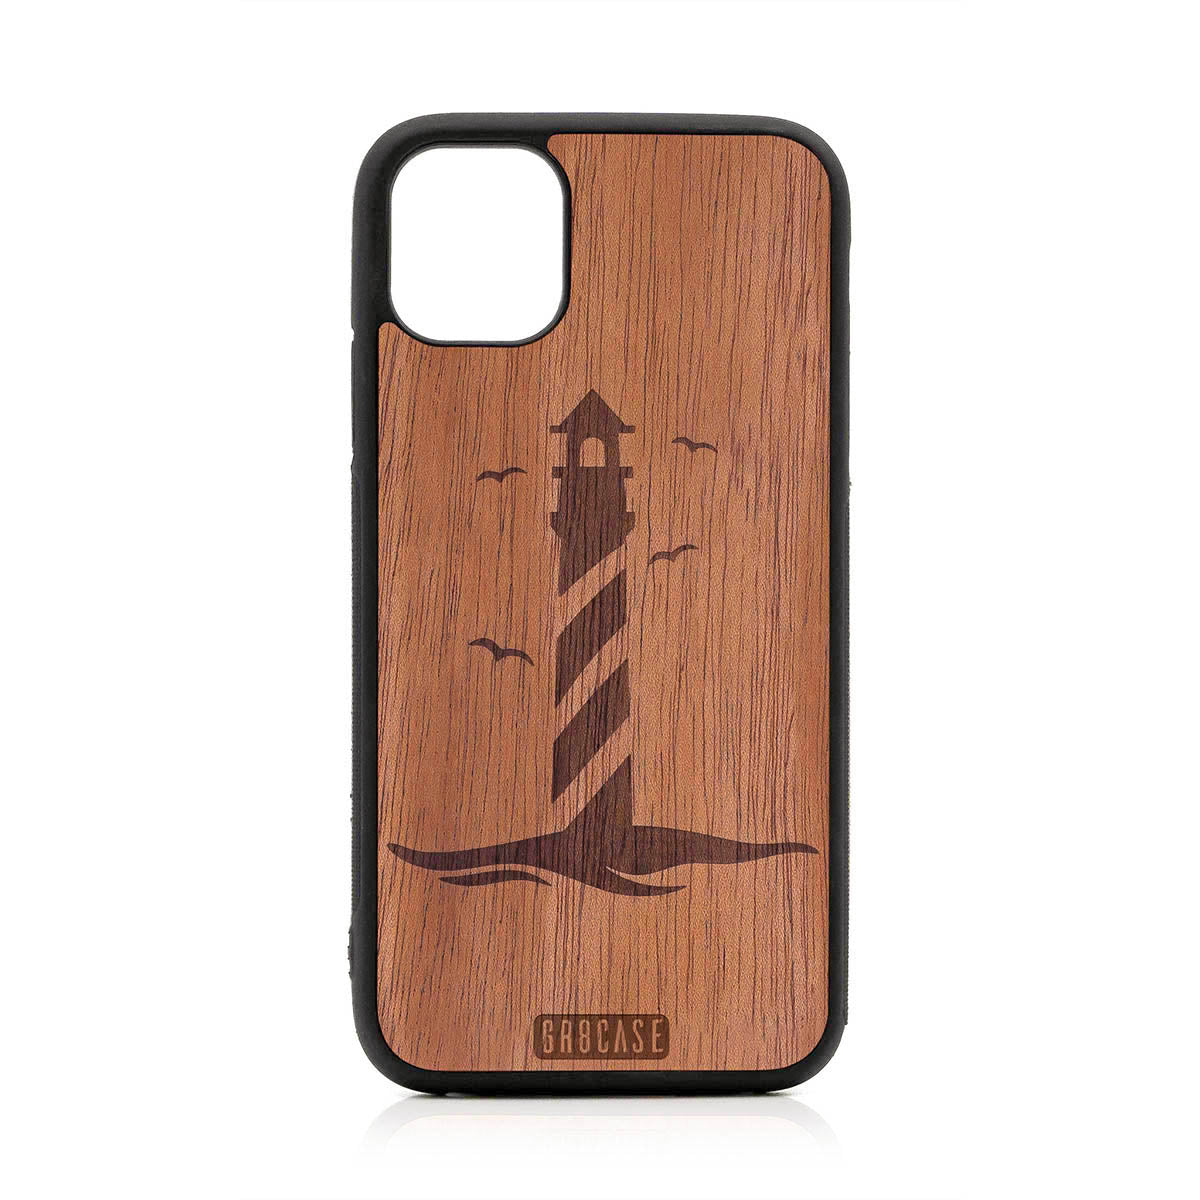 Lighthouse Design Wood Case For iPhone 11